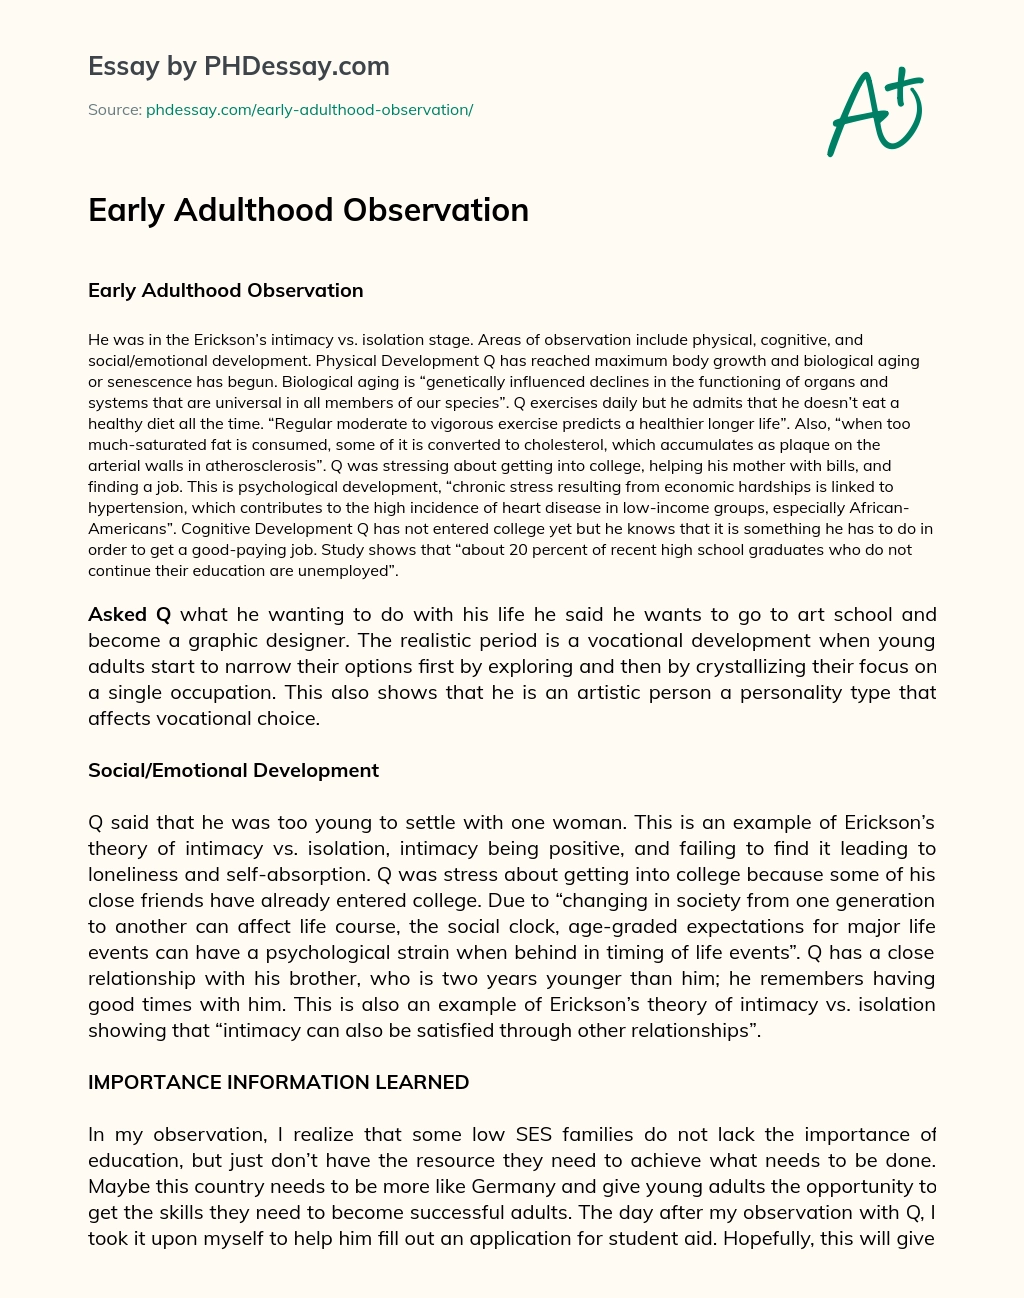 Early Adulthood Observation essay